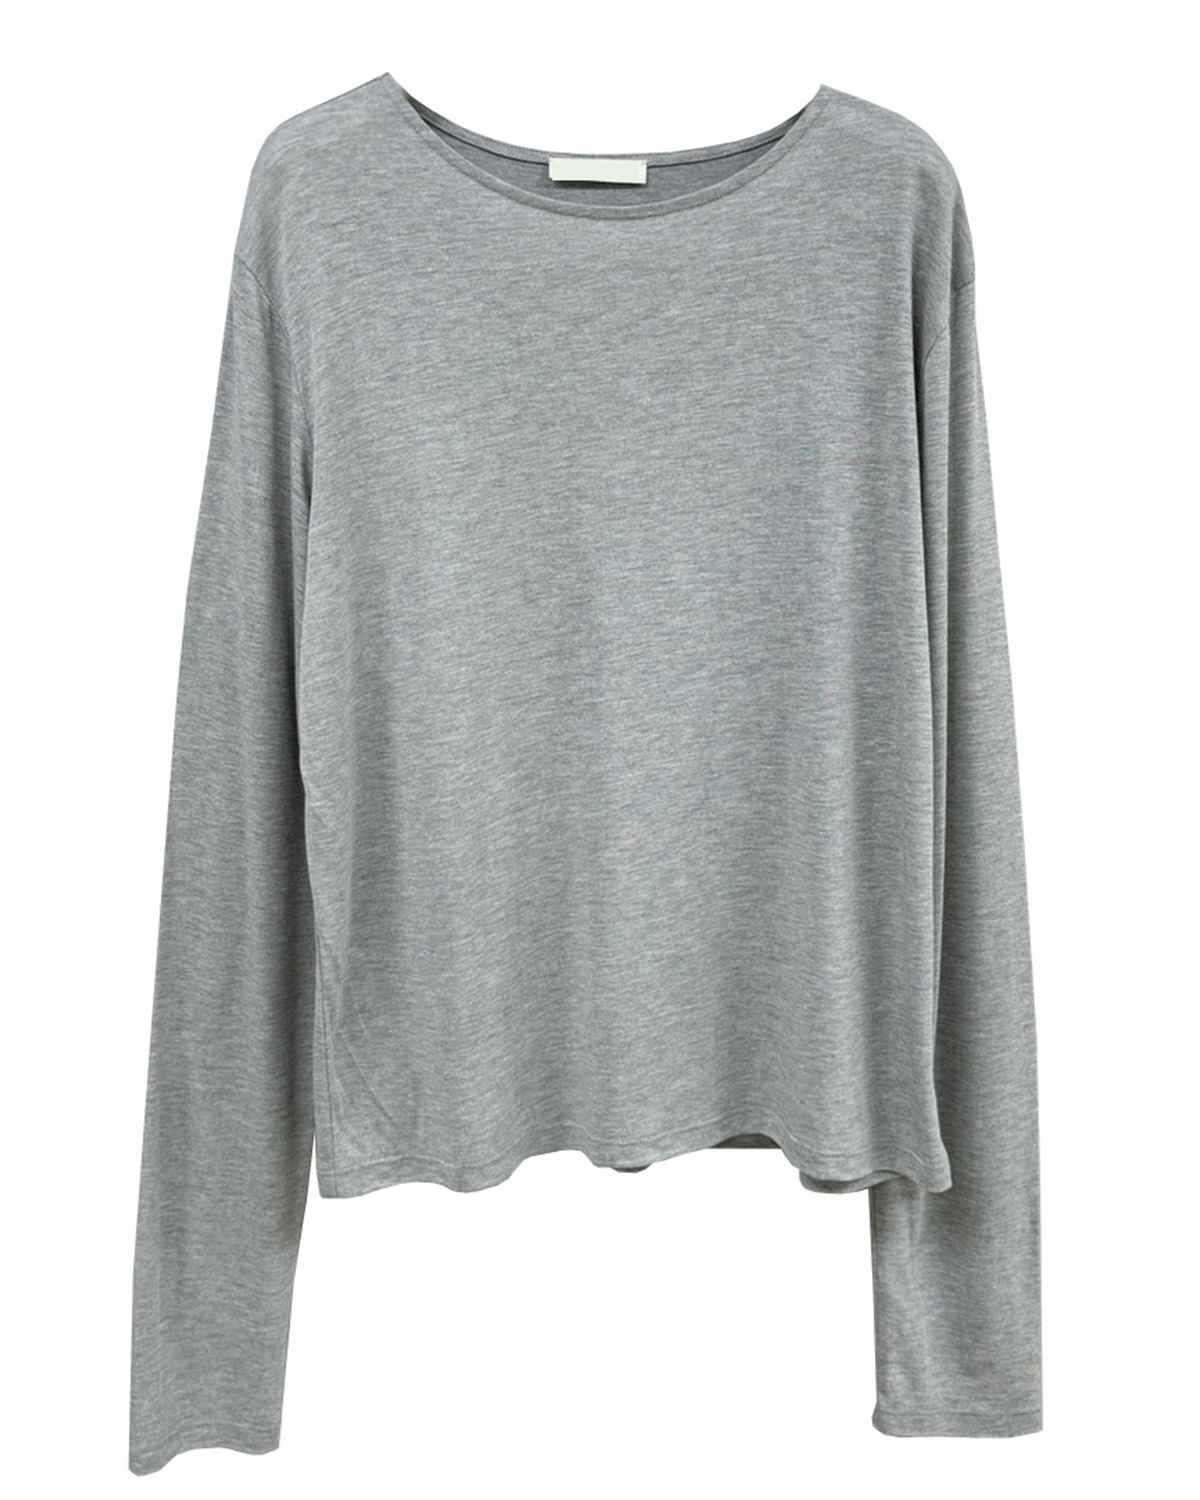 MARKEDLY PICK!) LONG SLEEVE DAILY T-SHIRT (5COLOR)